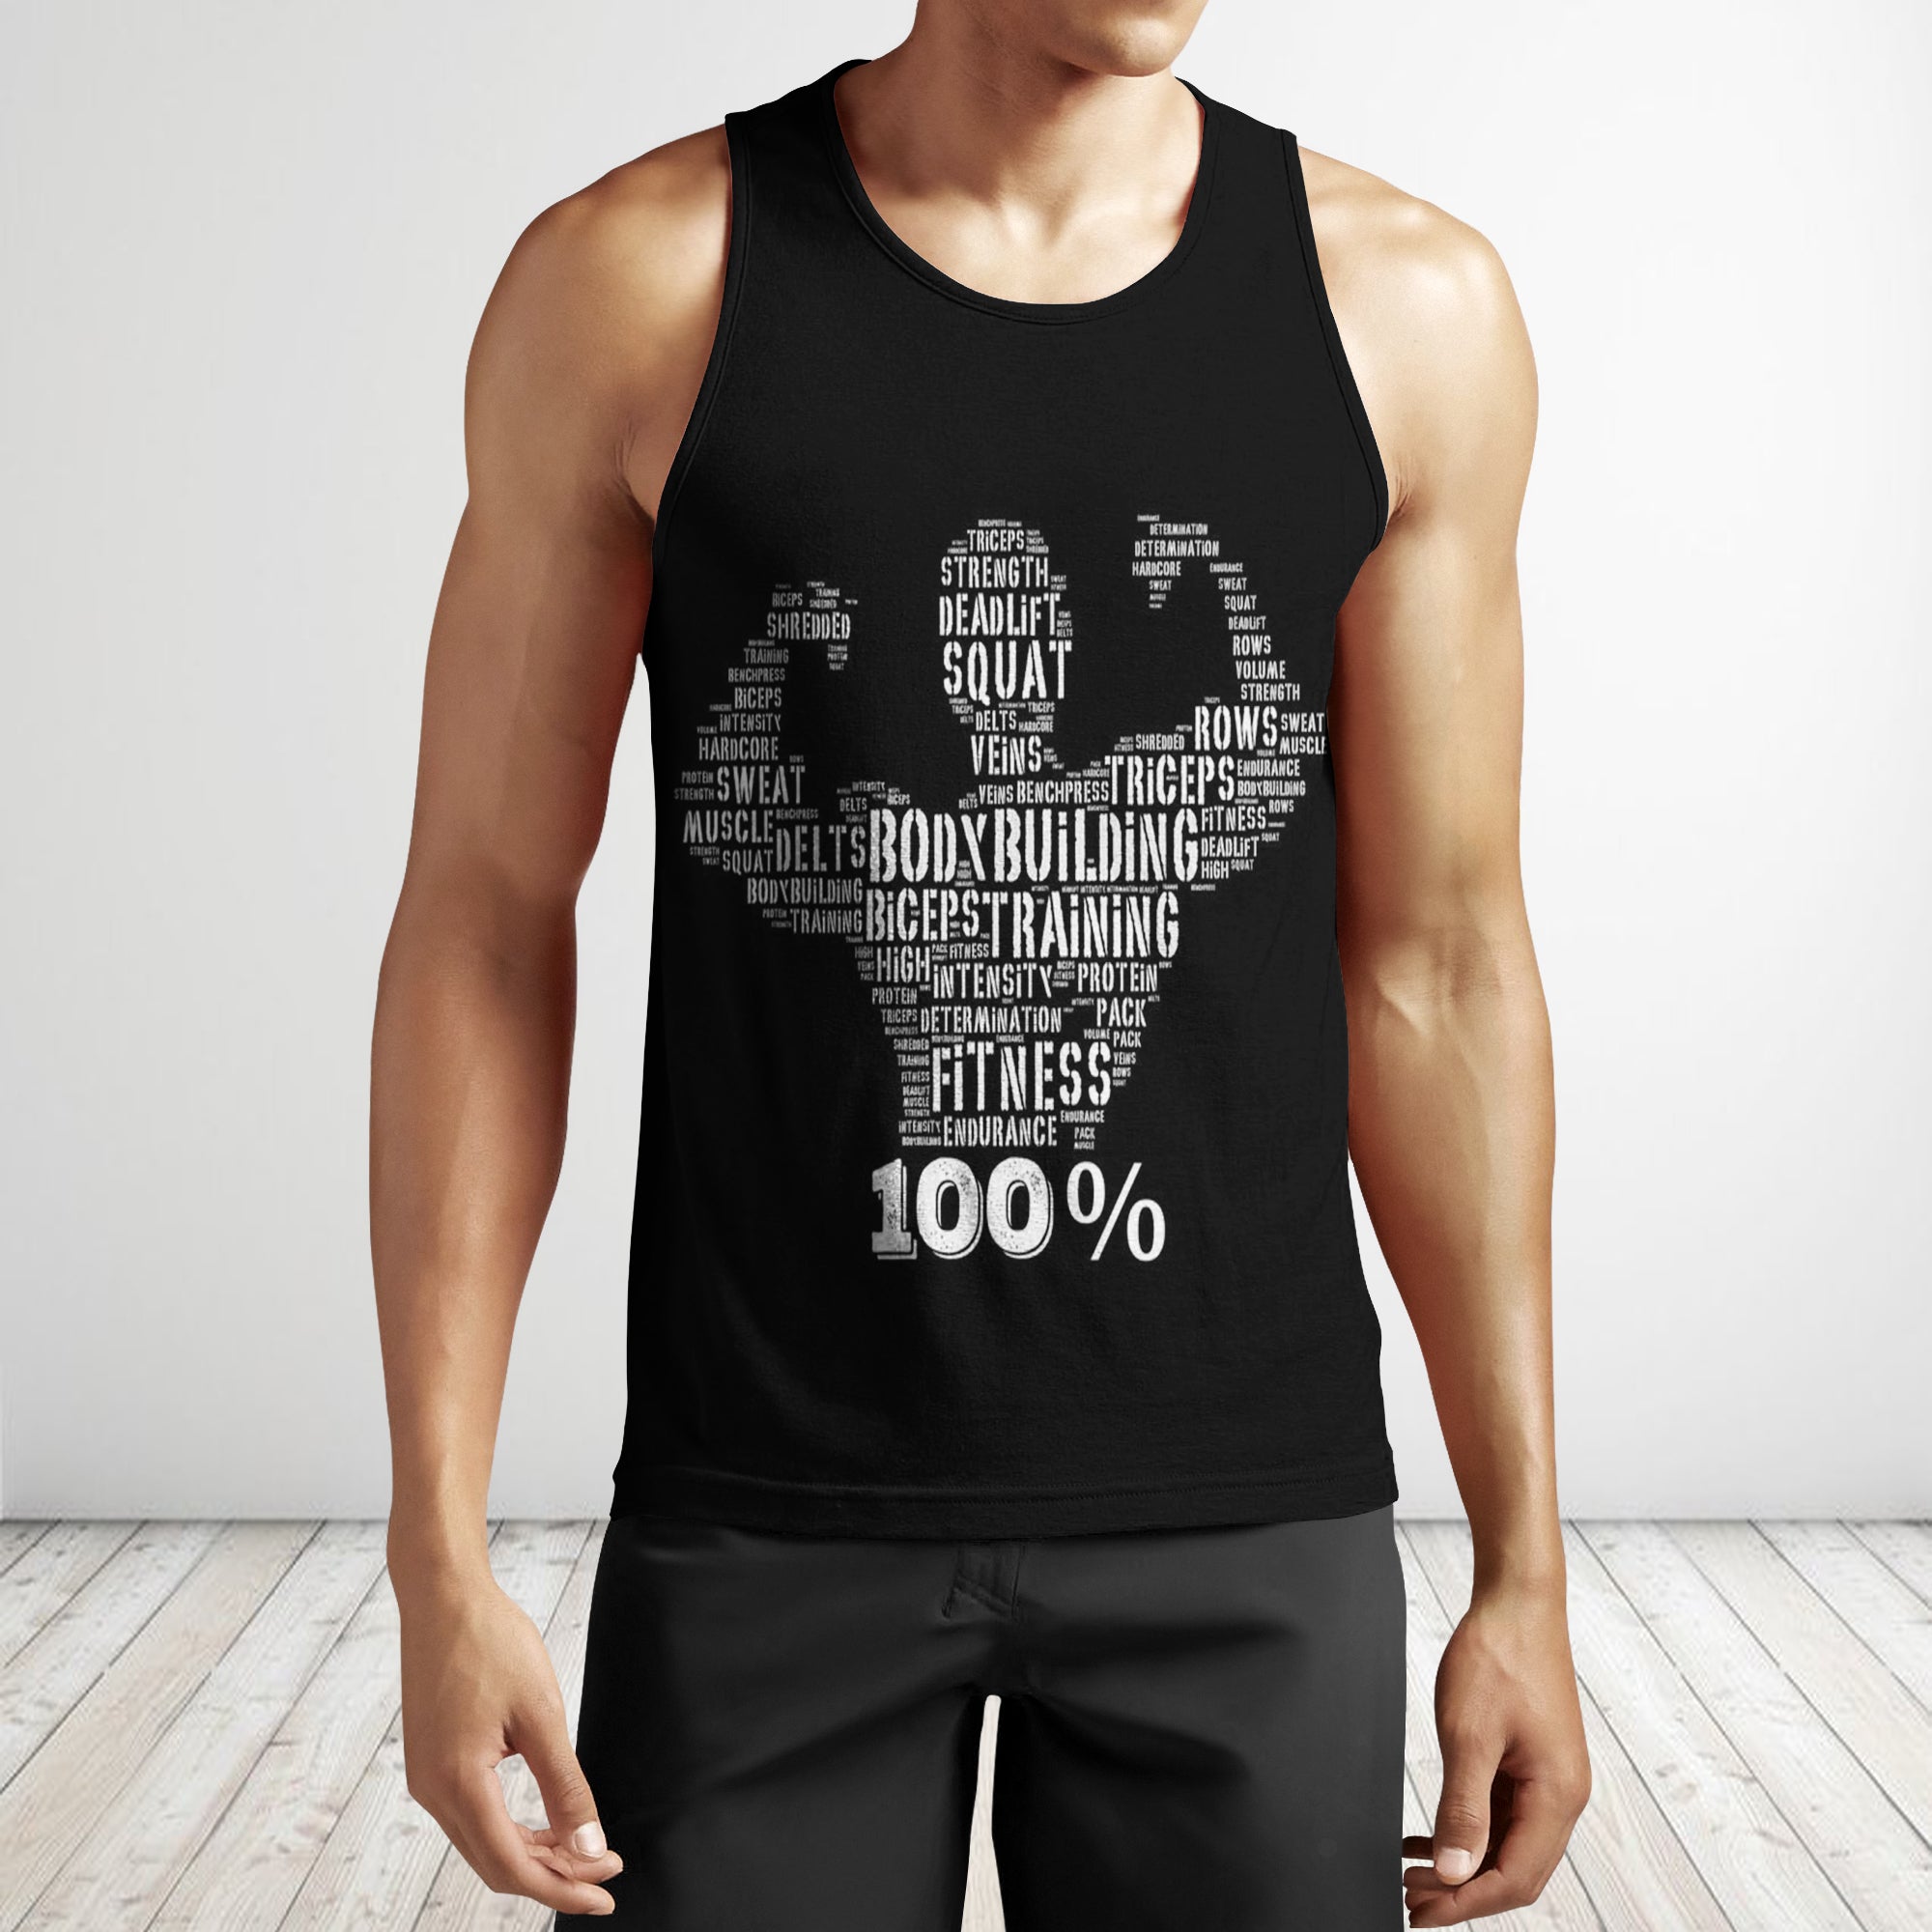 Gym Man Tank Tops Weightlifting Bodybuilding Fitness Gift 10994